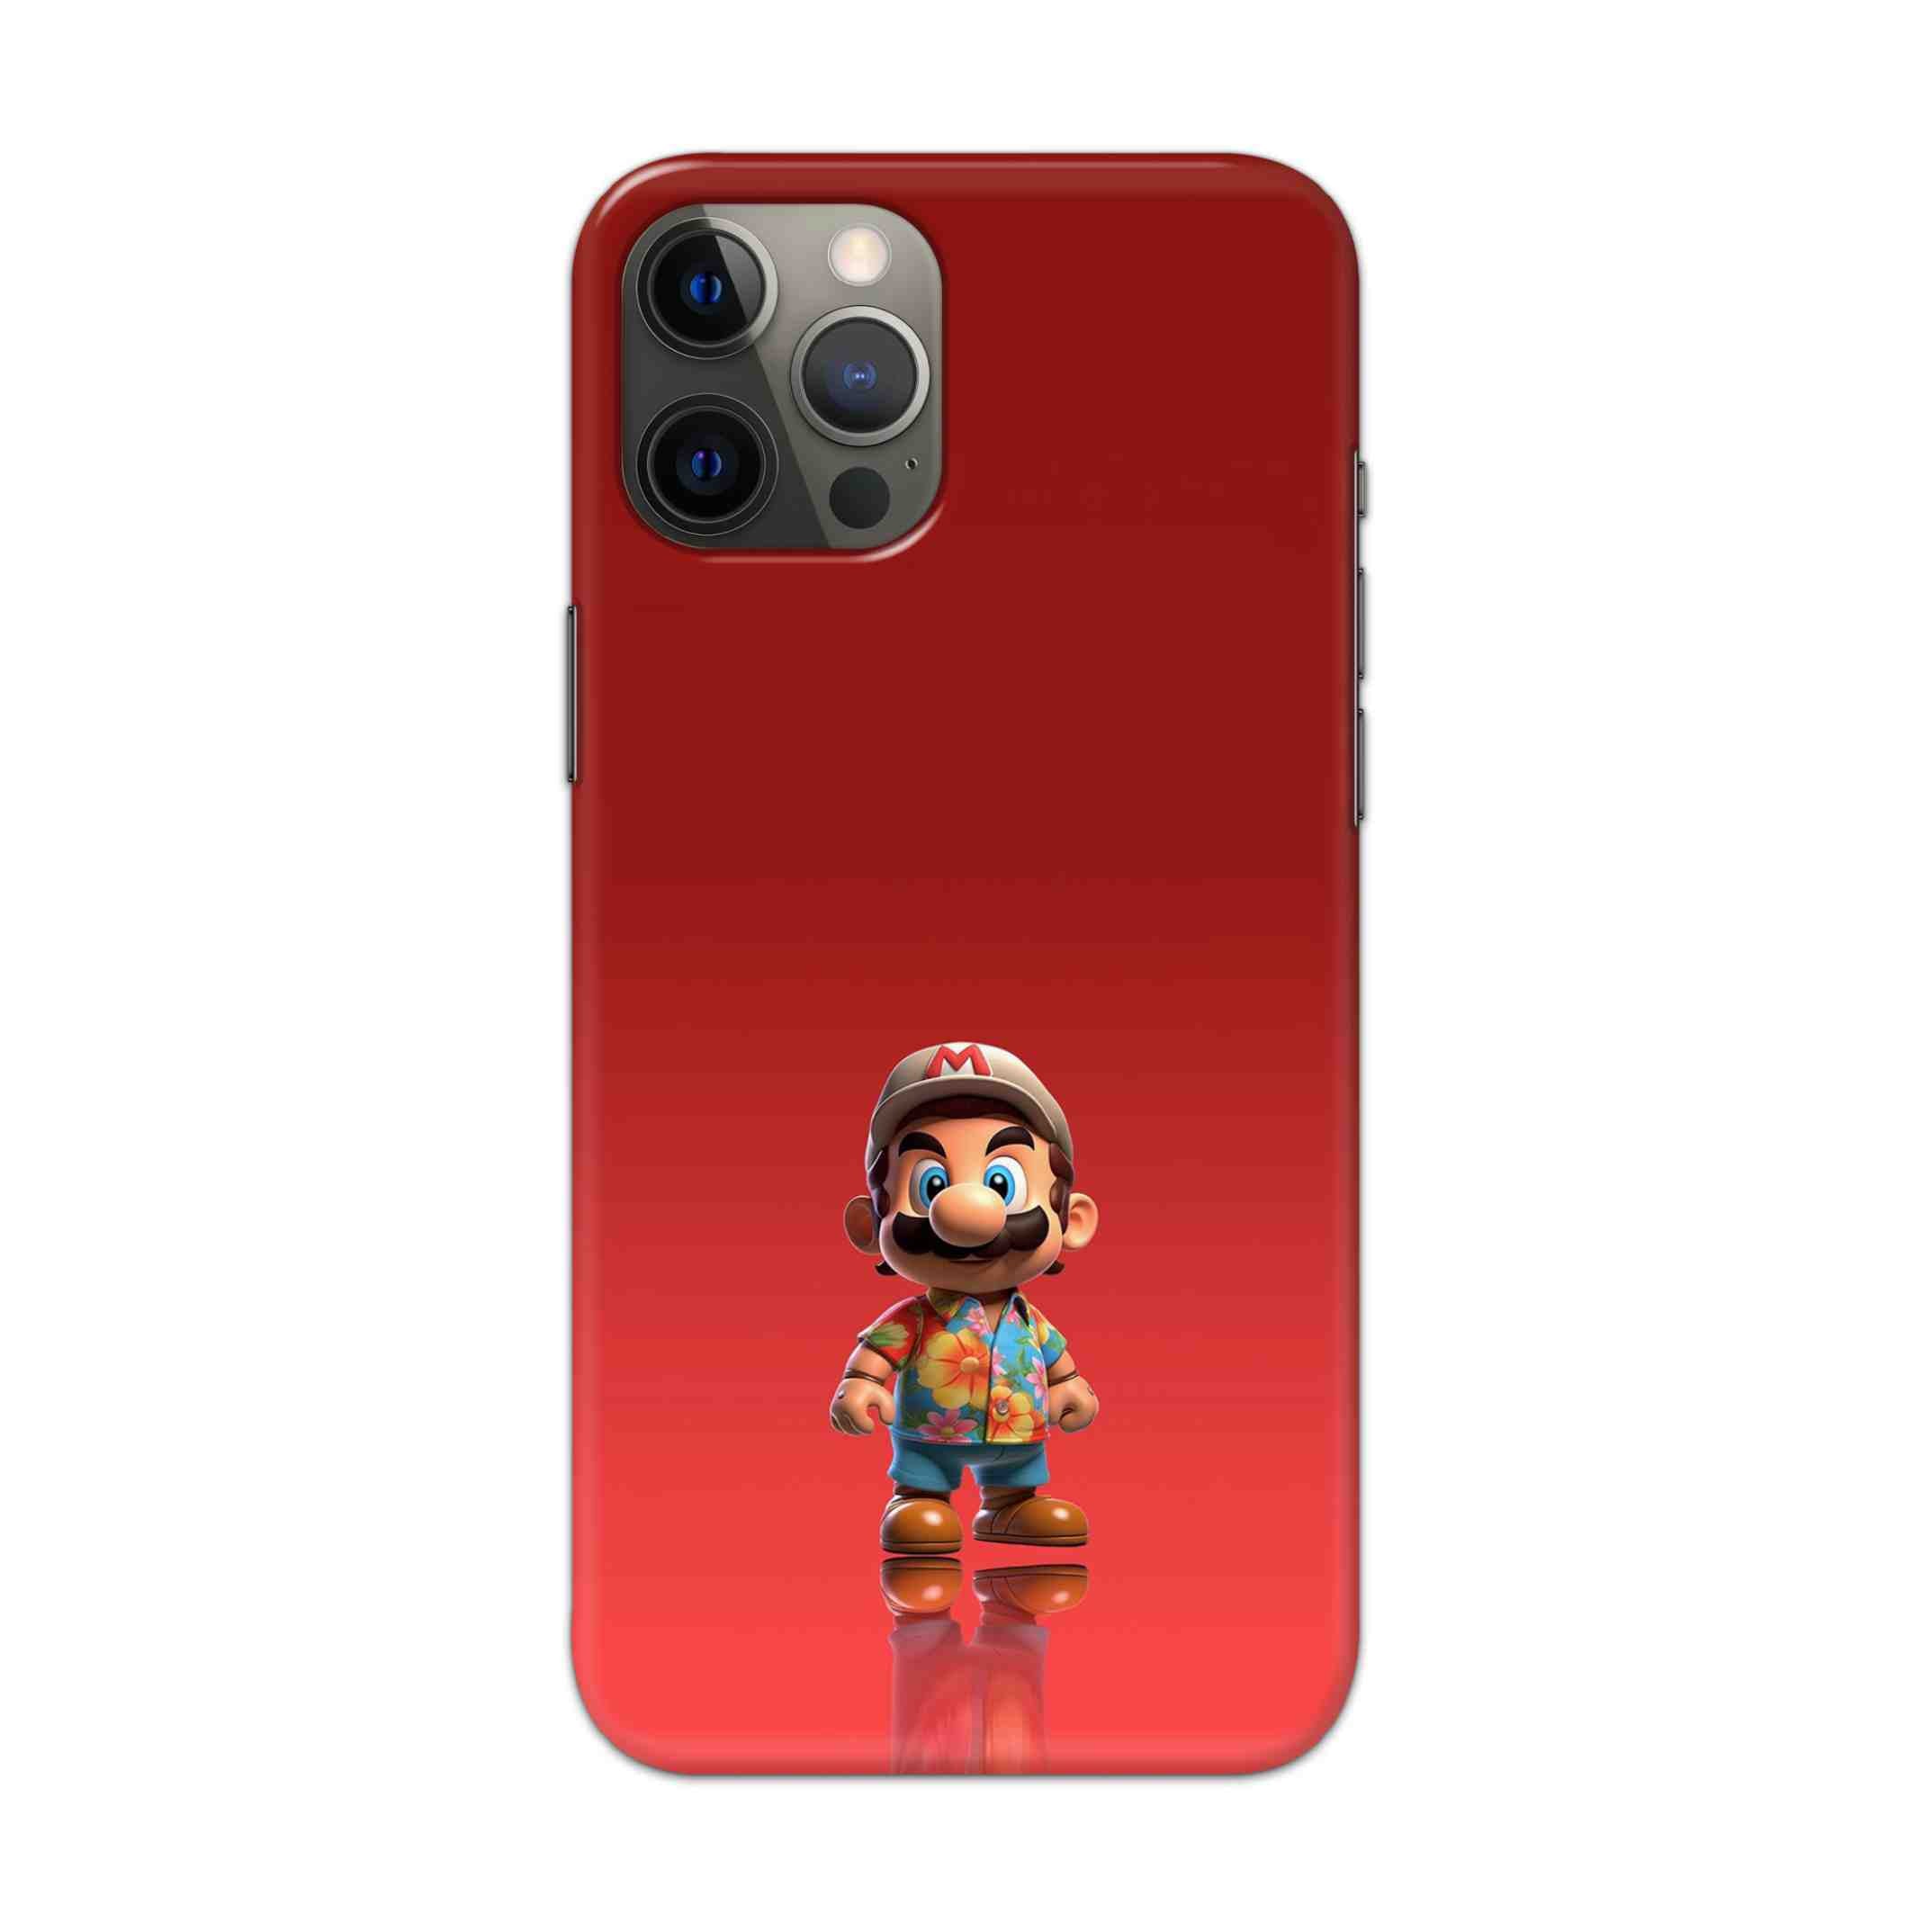 Buy Mario Hard Back Mobile Phone Case/Cover For Apple iPhone 12 pro max Online